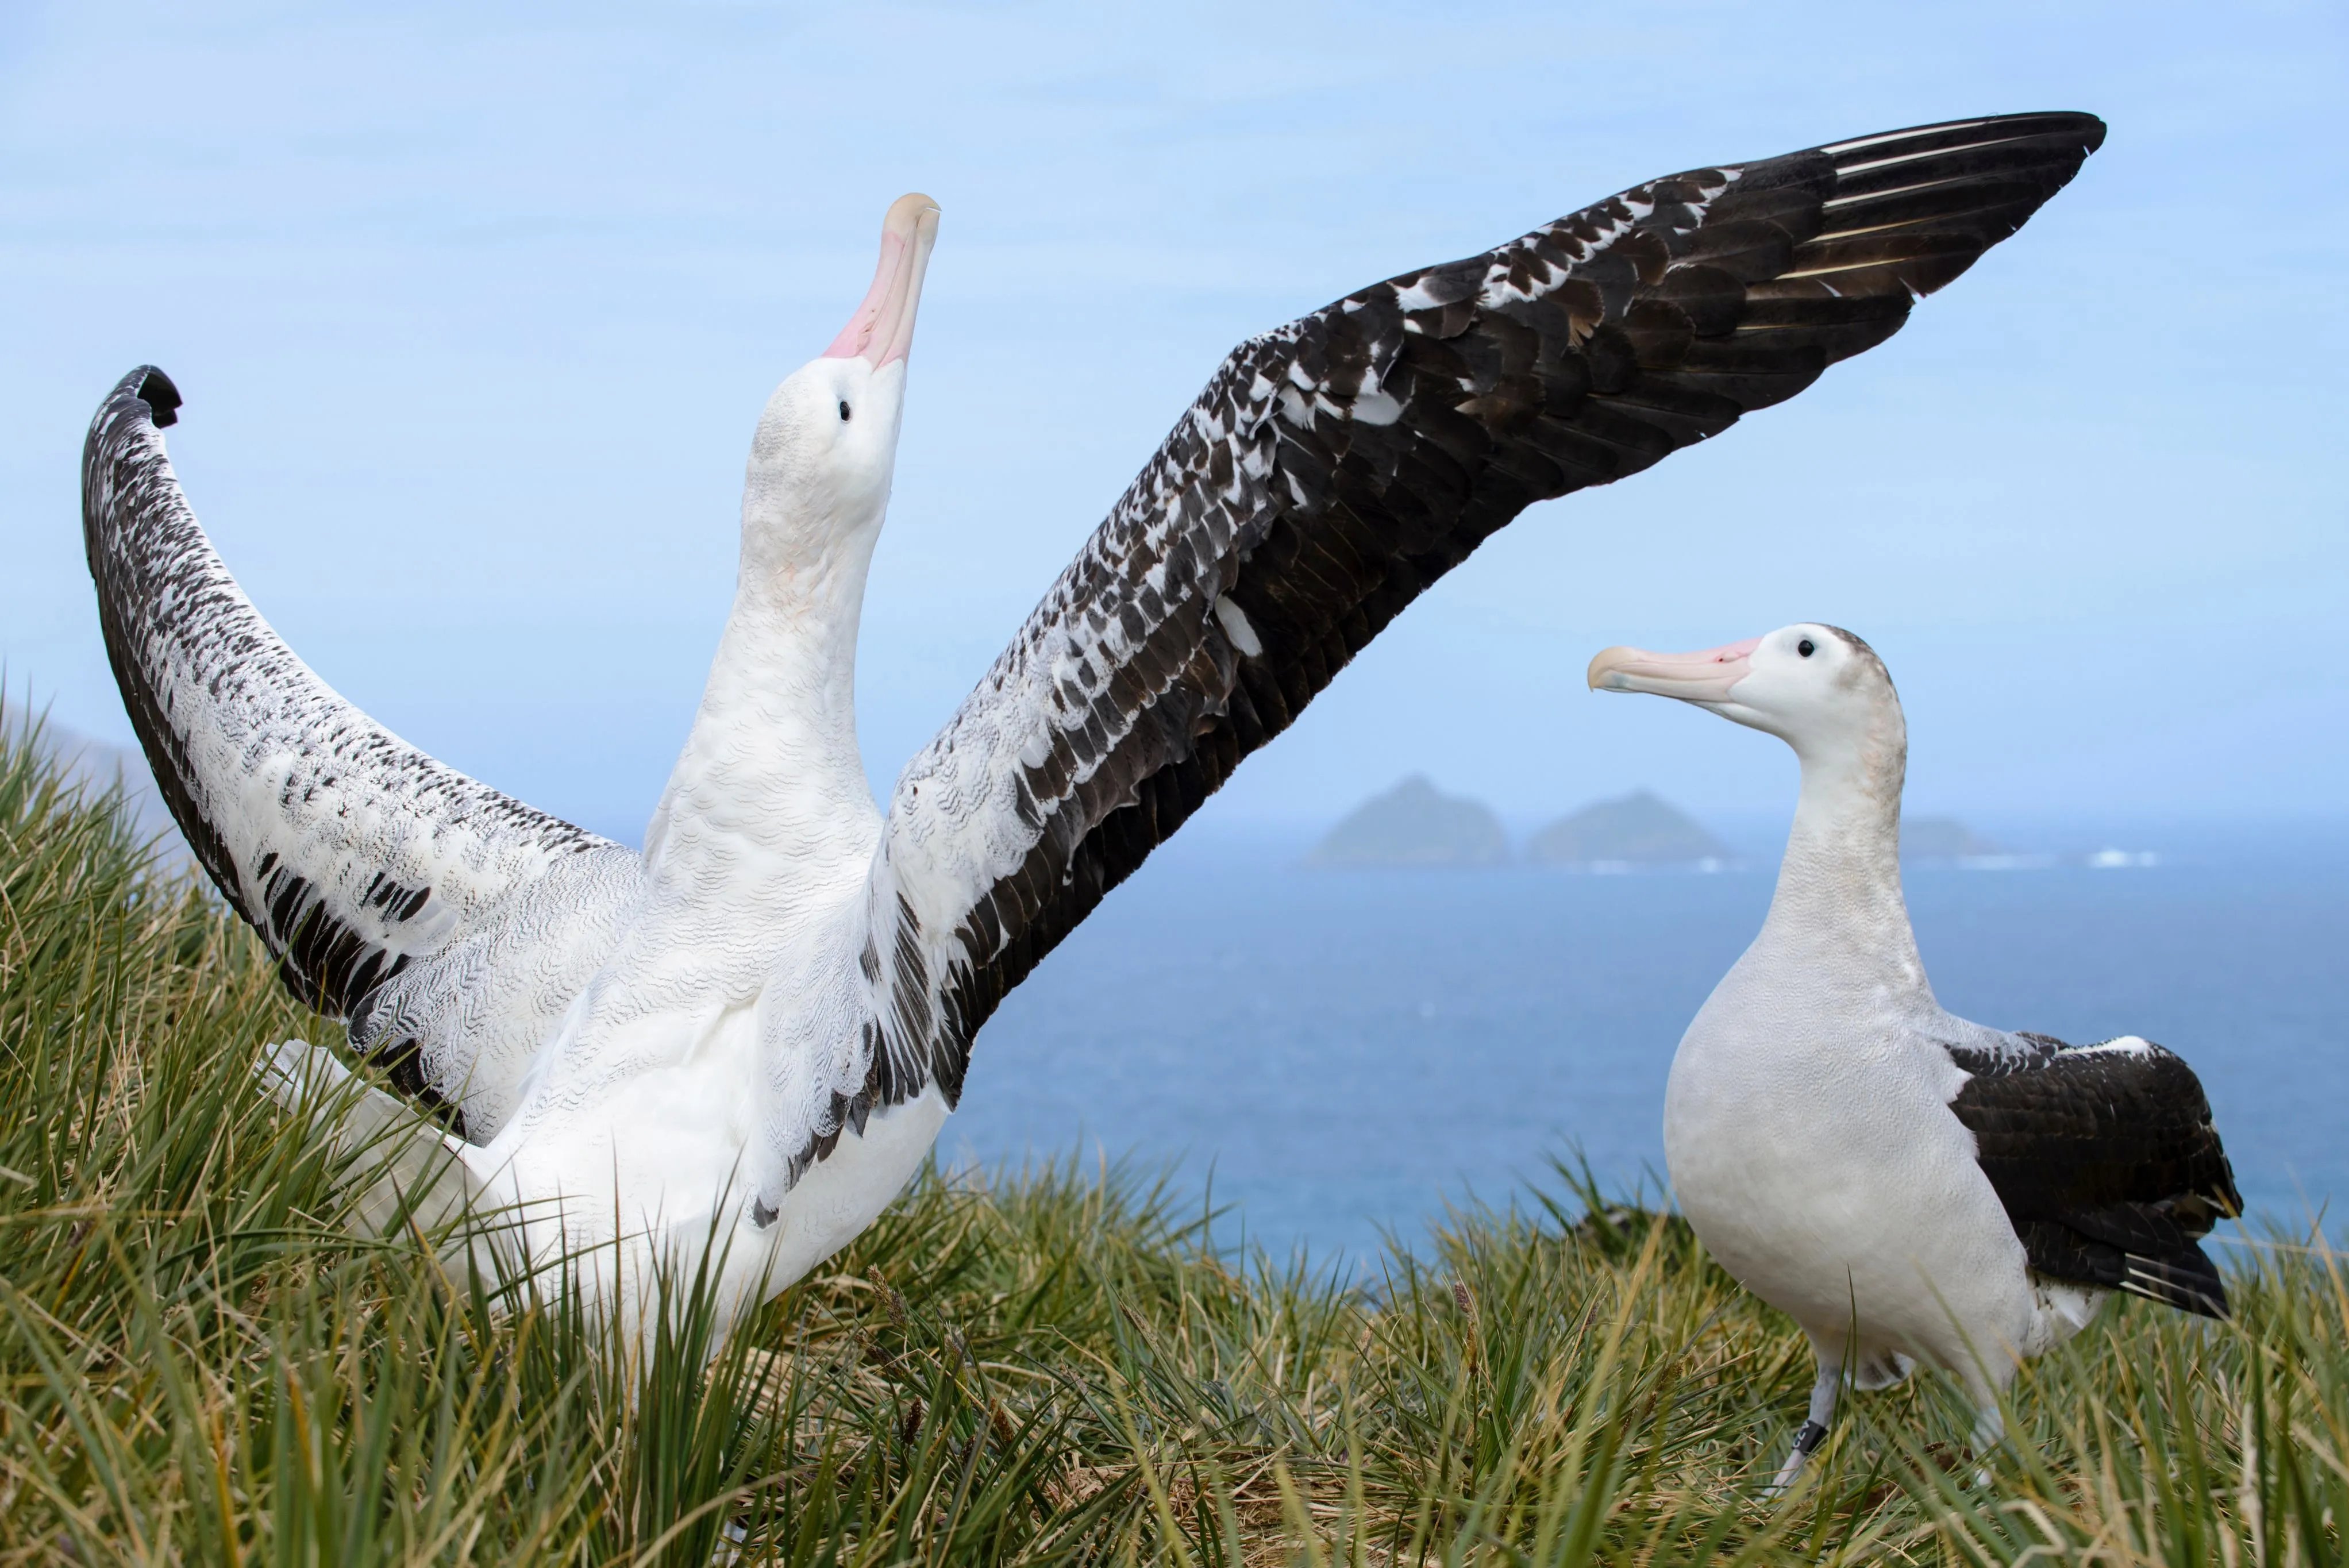 Two Albatrosses on a grassy cliffside, one with spread wings. Sea and islands in the background.